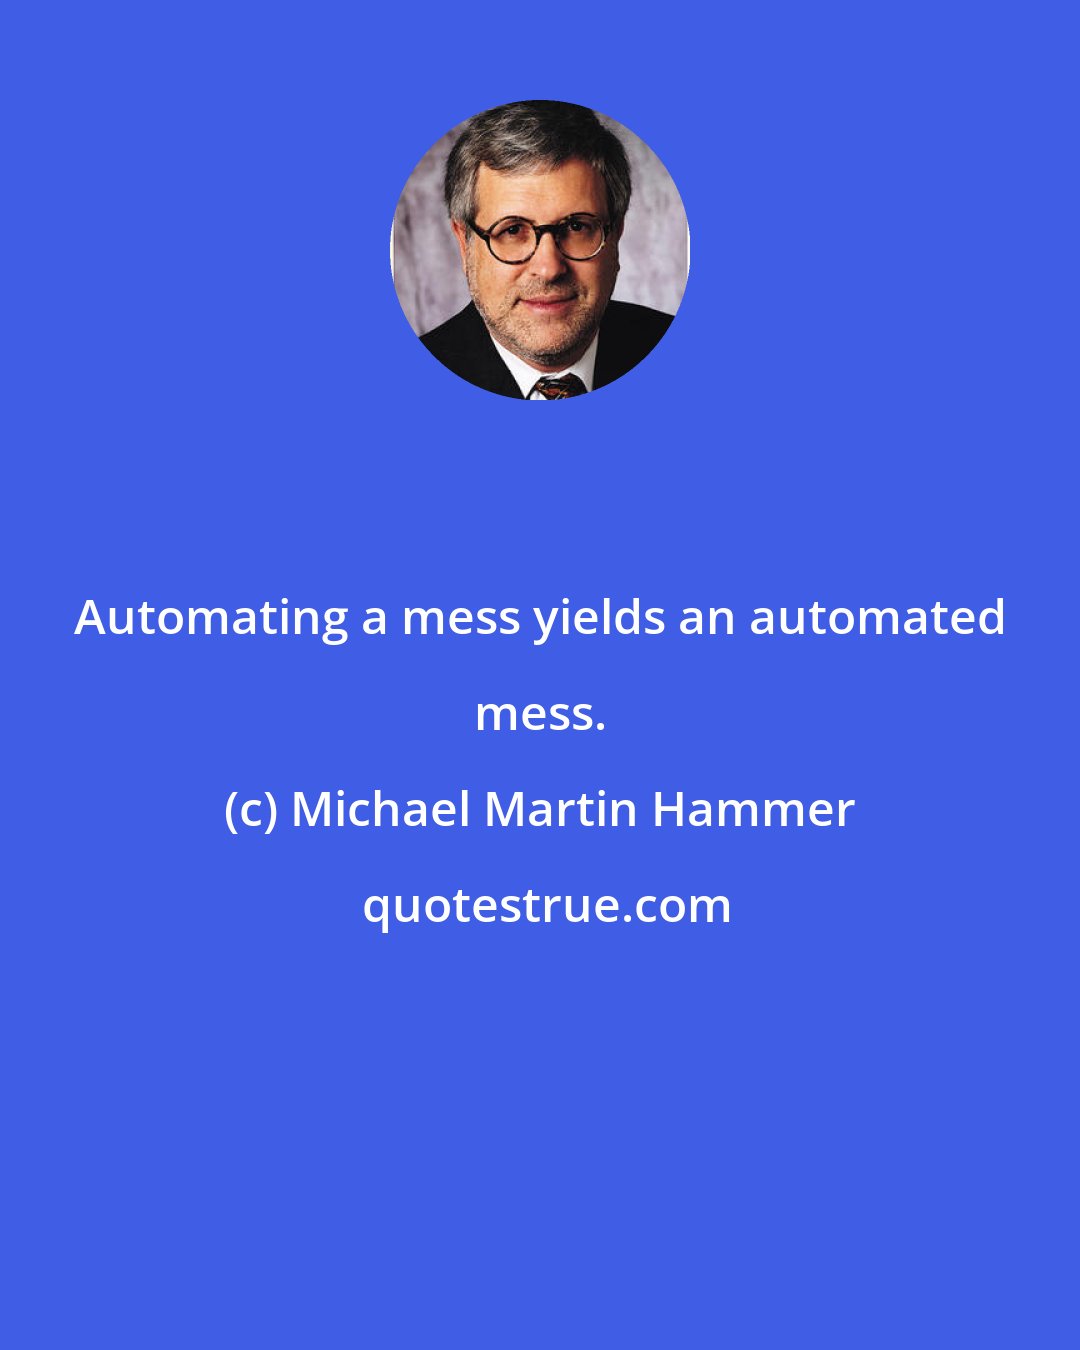 Michael Martin Hammer: Automating a mess yields an automated mess.